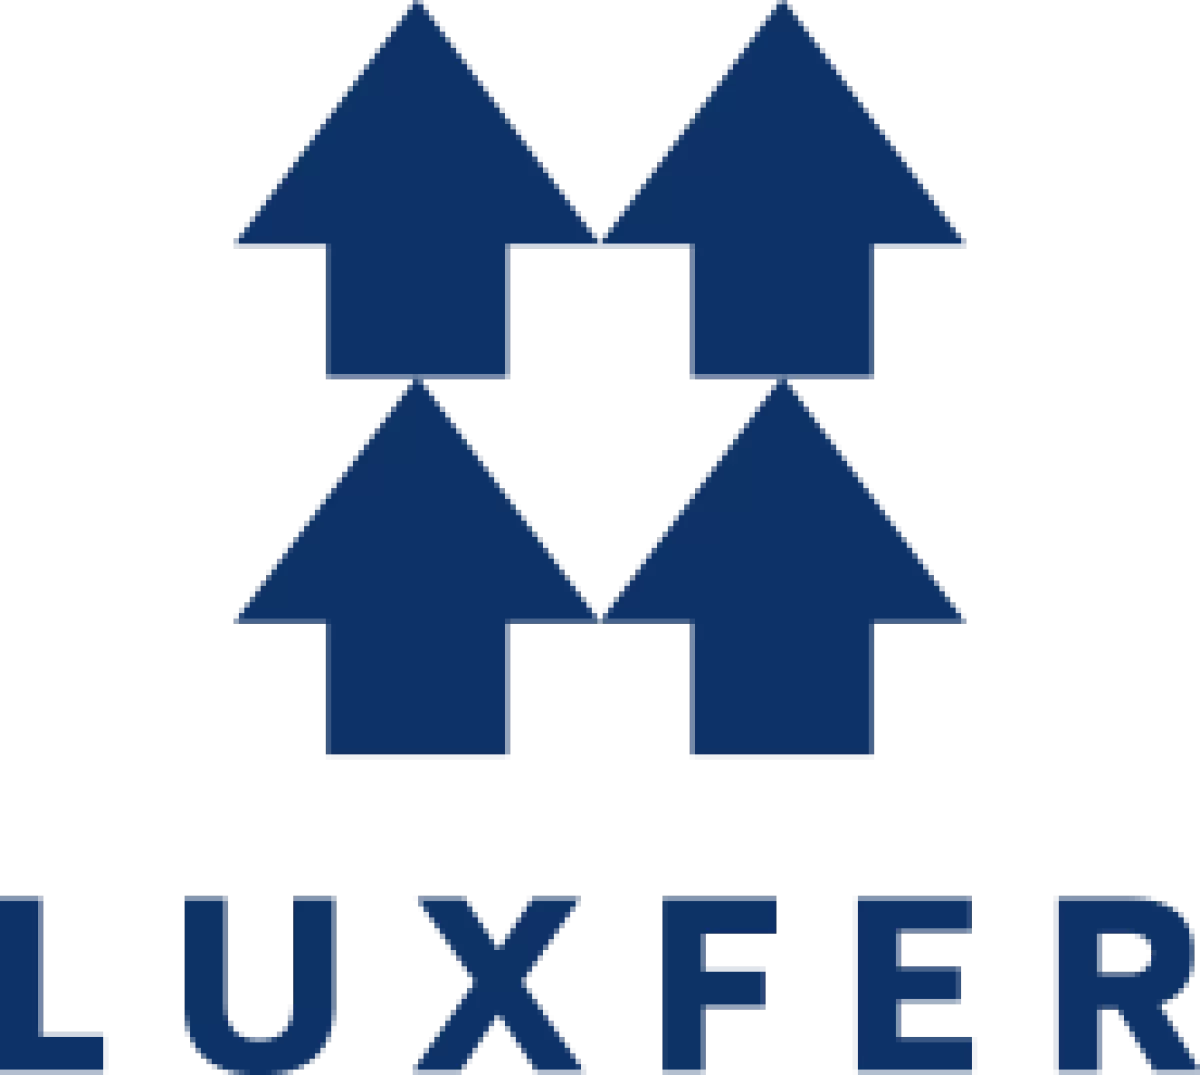 Luxfer